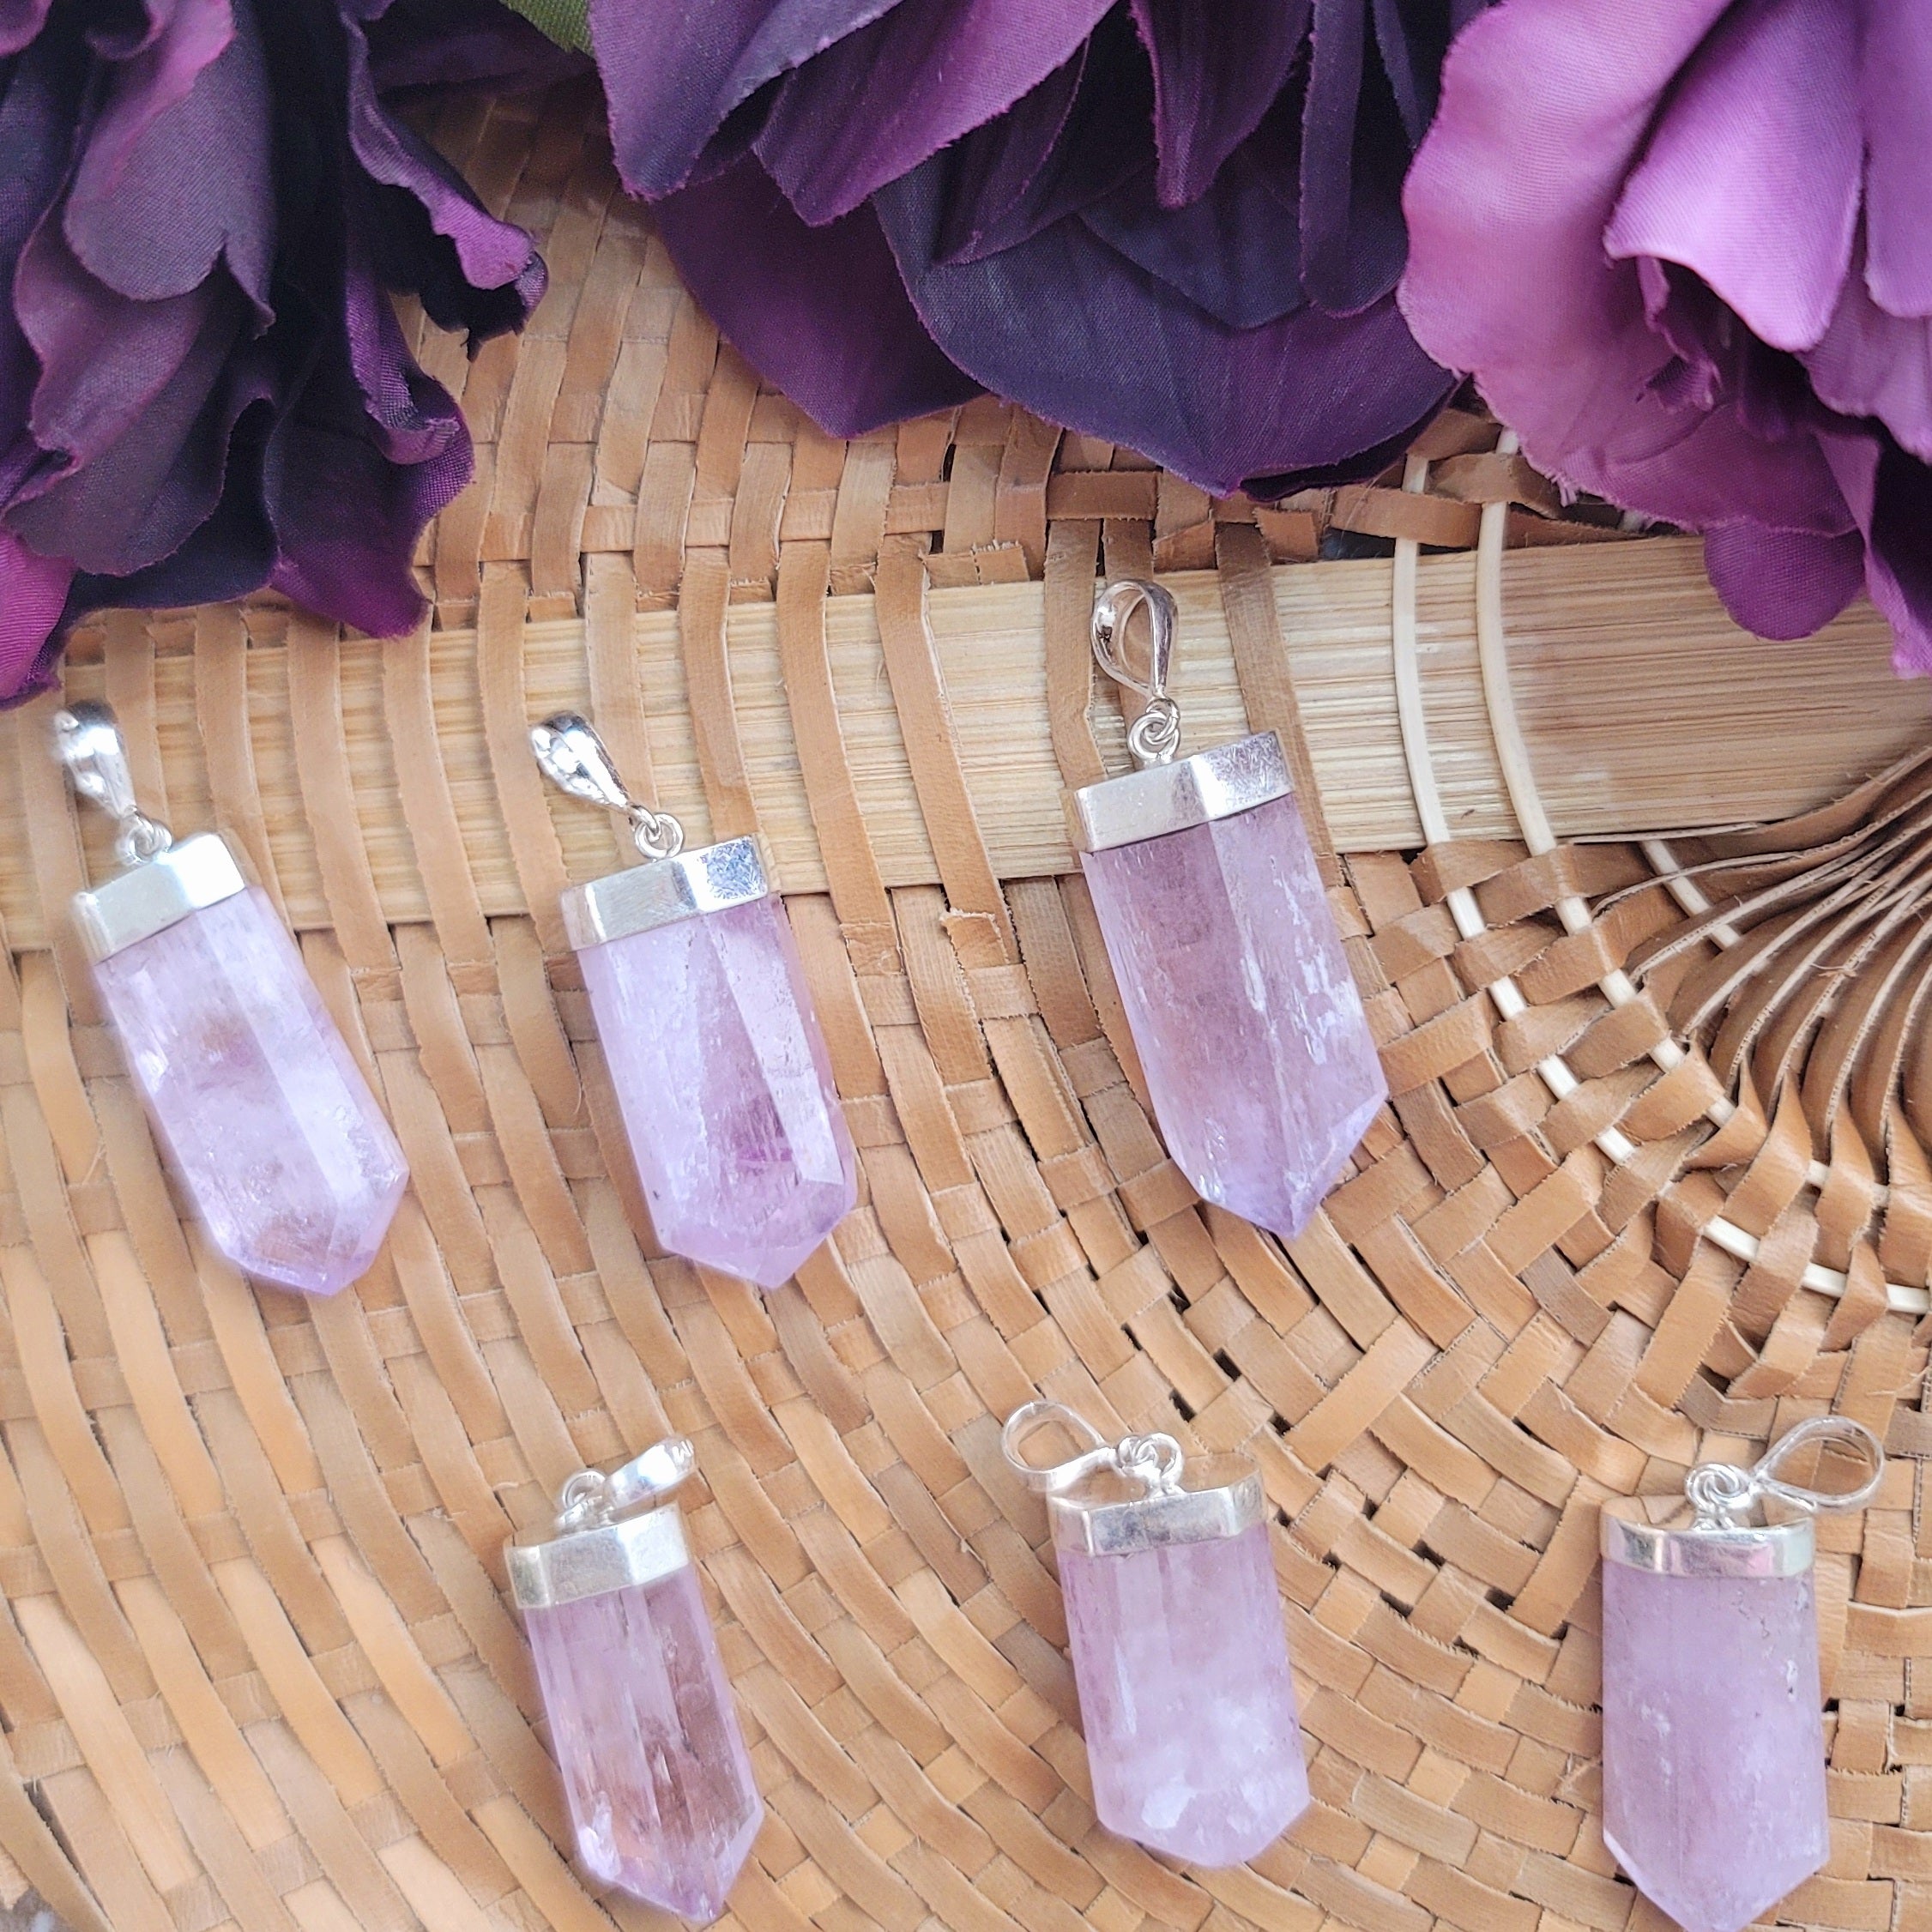 Kunzite Pendant .925 Silver for Emotional, Family Healing and Opening Your Heart to Love